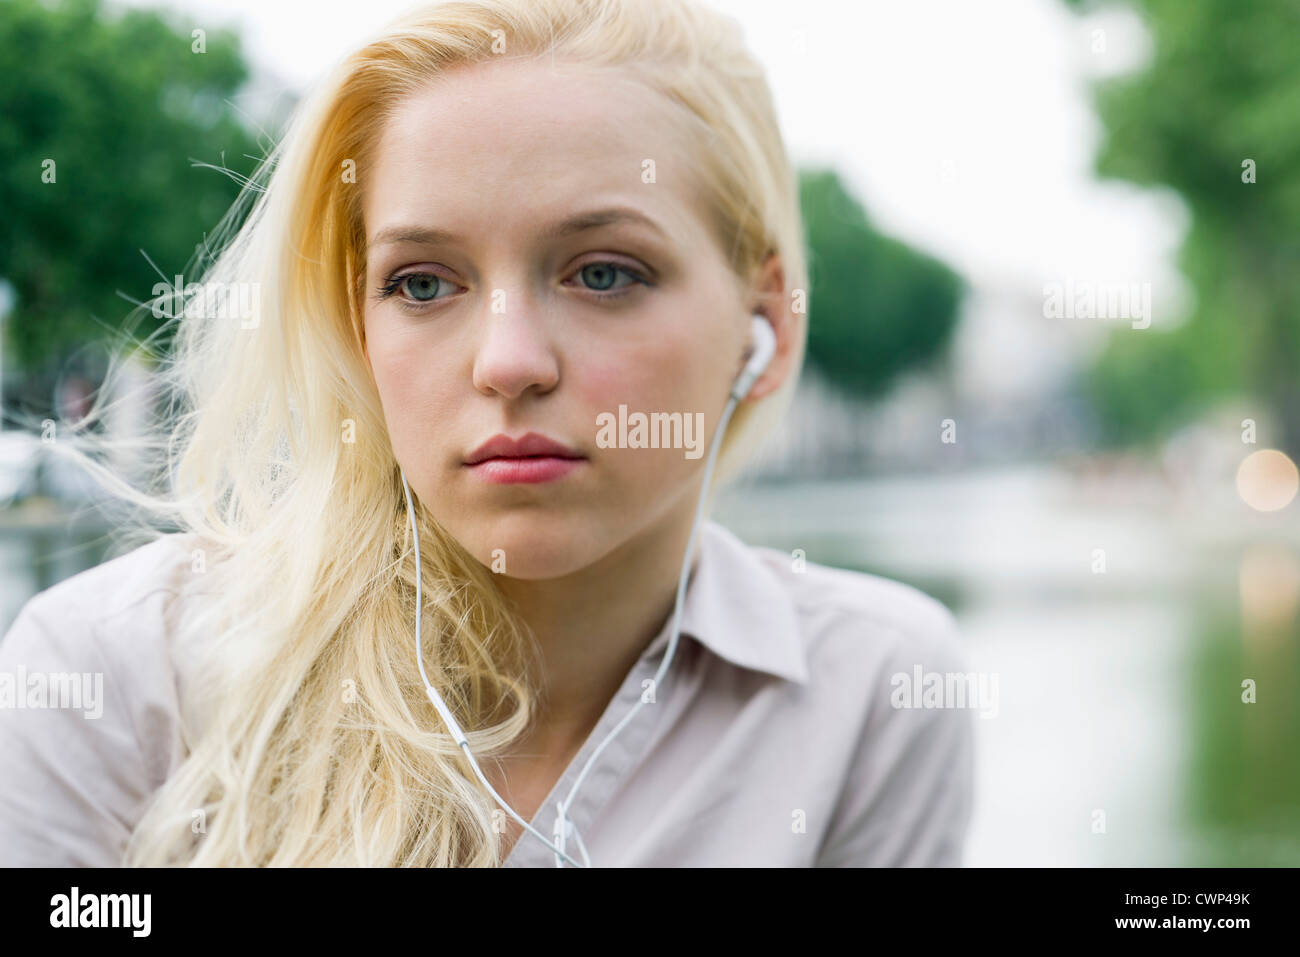 Young woman listening to earphones, looking away in thought Stock Photo